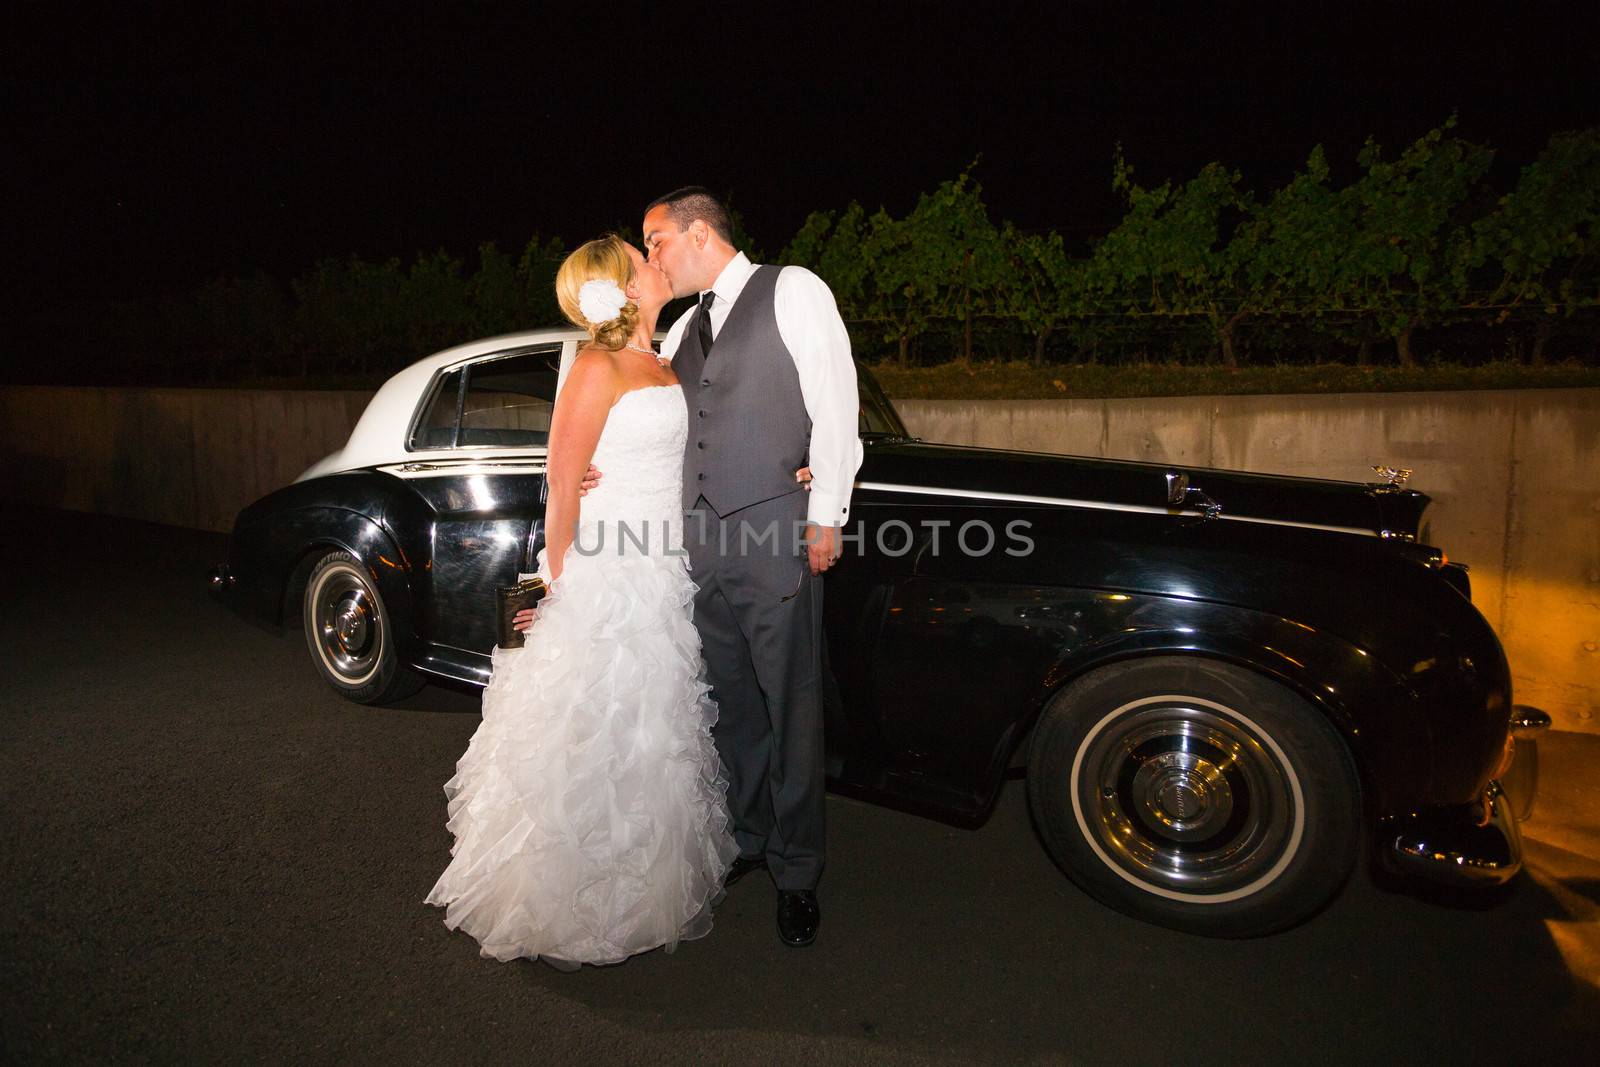 A bride and groom pose for a last photo in front of an old classic car at a vineyard at night.